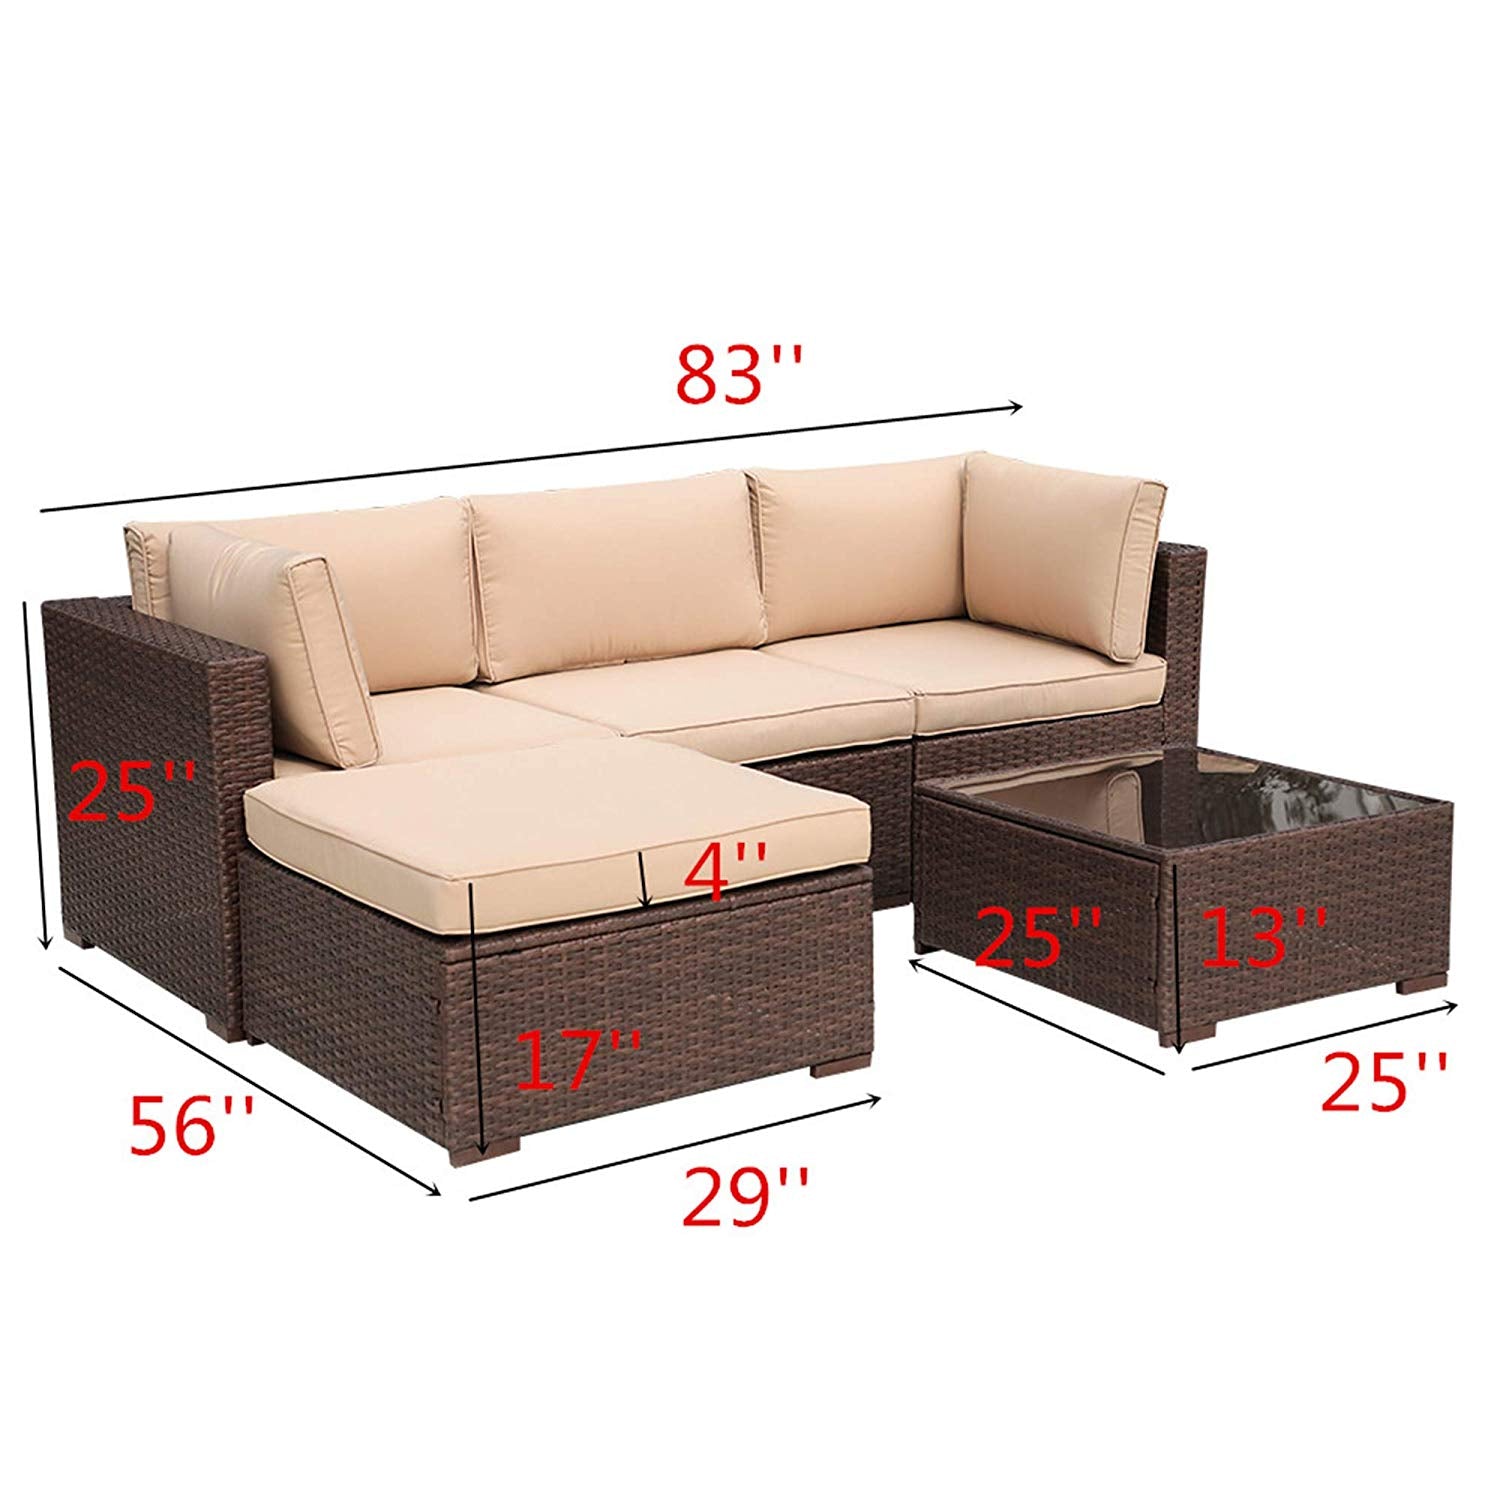 PATIORAMA Outdoor Furniture Sectional Sofa Set (5-Piece Set) All-Weather Brown PE Wicker with Beige Seat Cushions &Glass Coffee Table| Patio, Backyard, Pool| Steel Frame